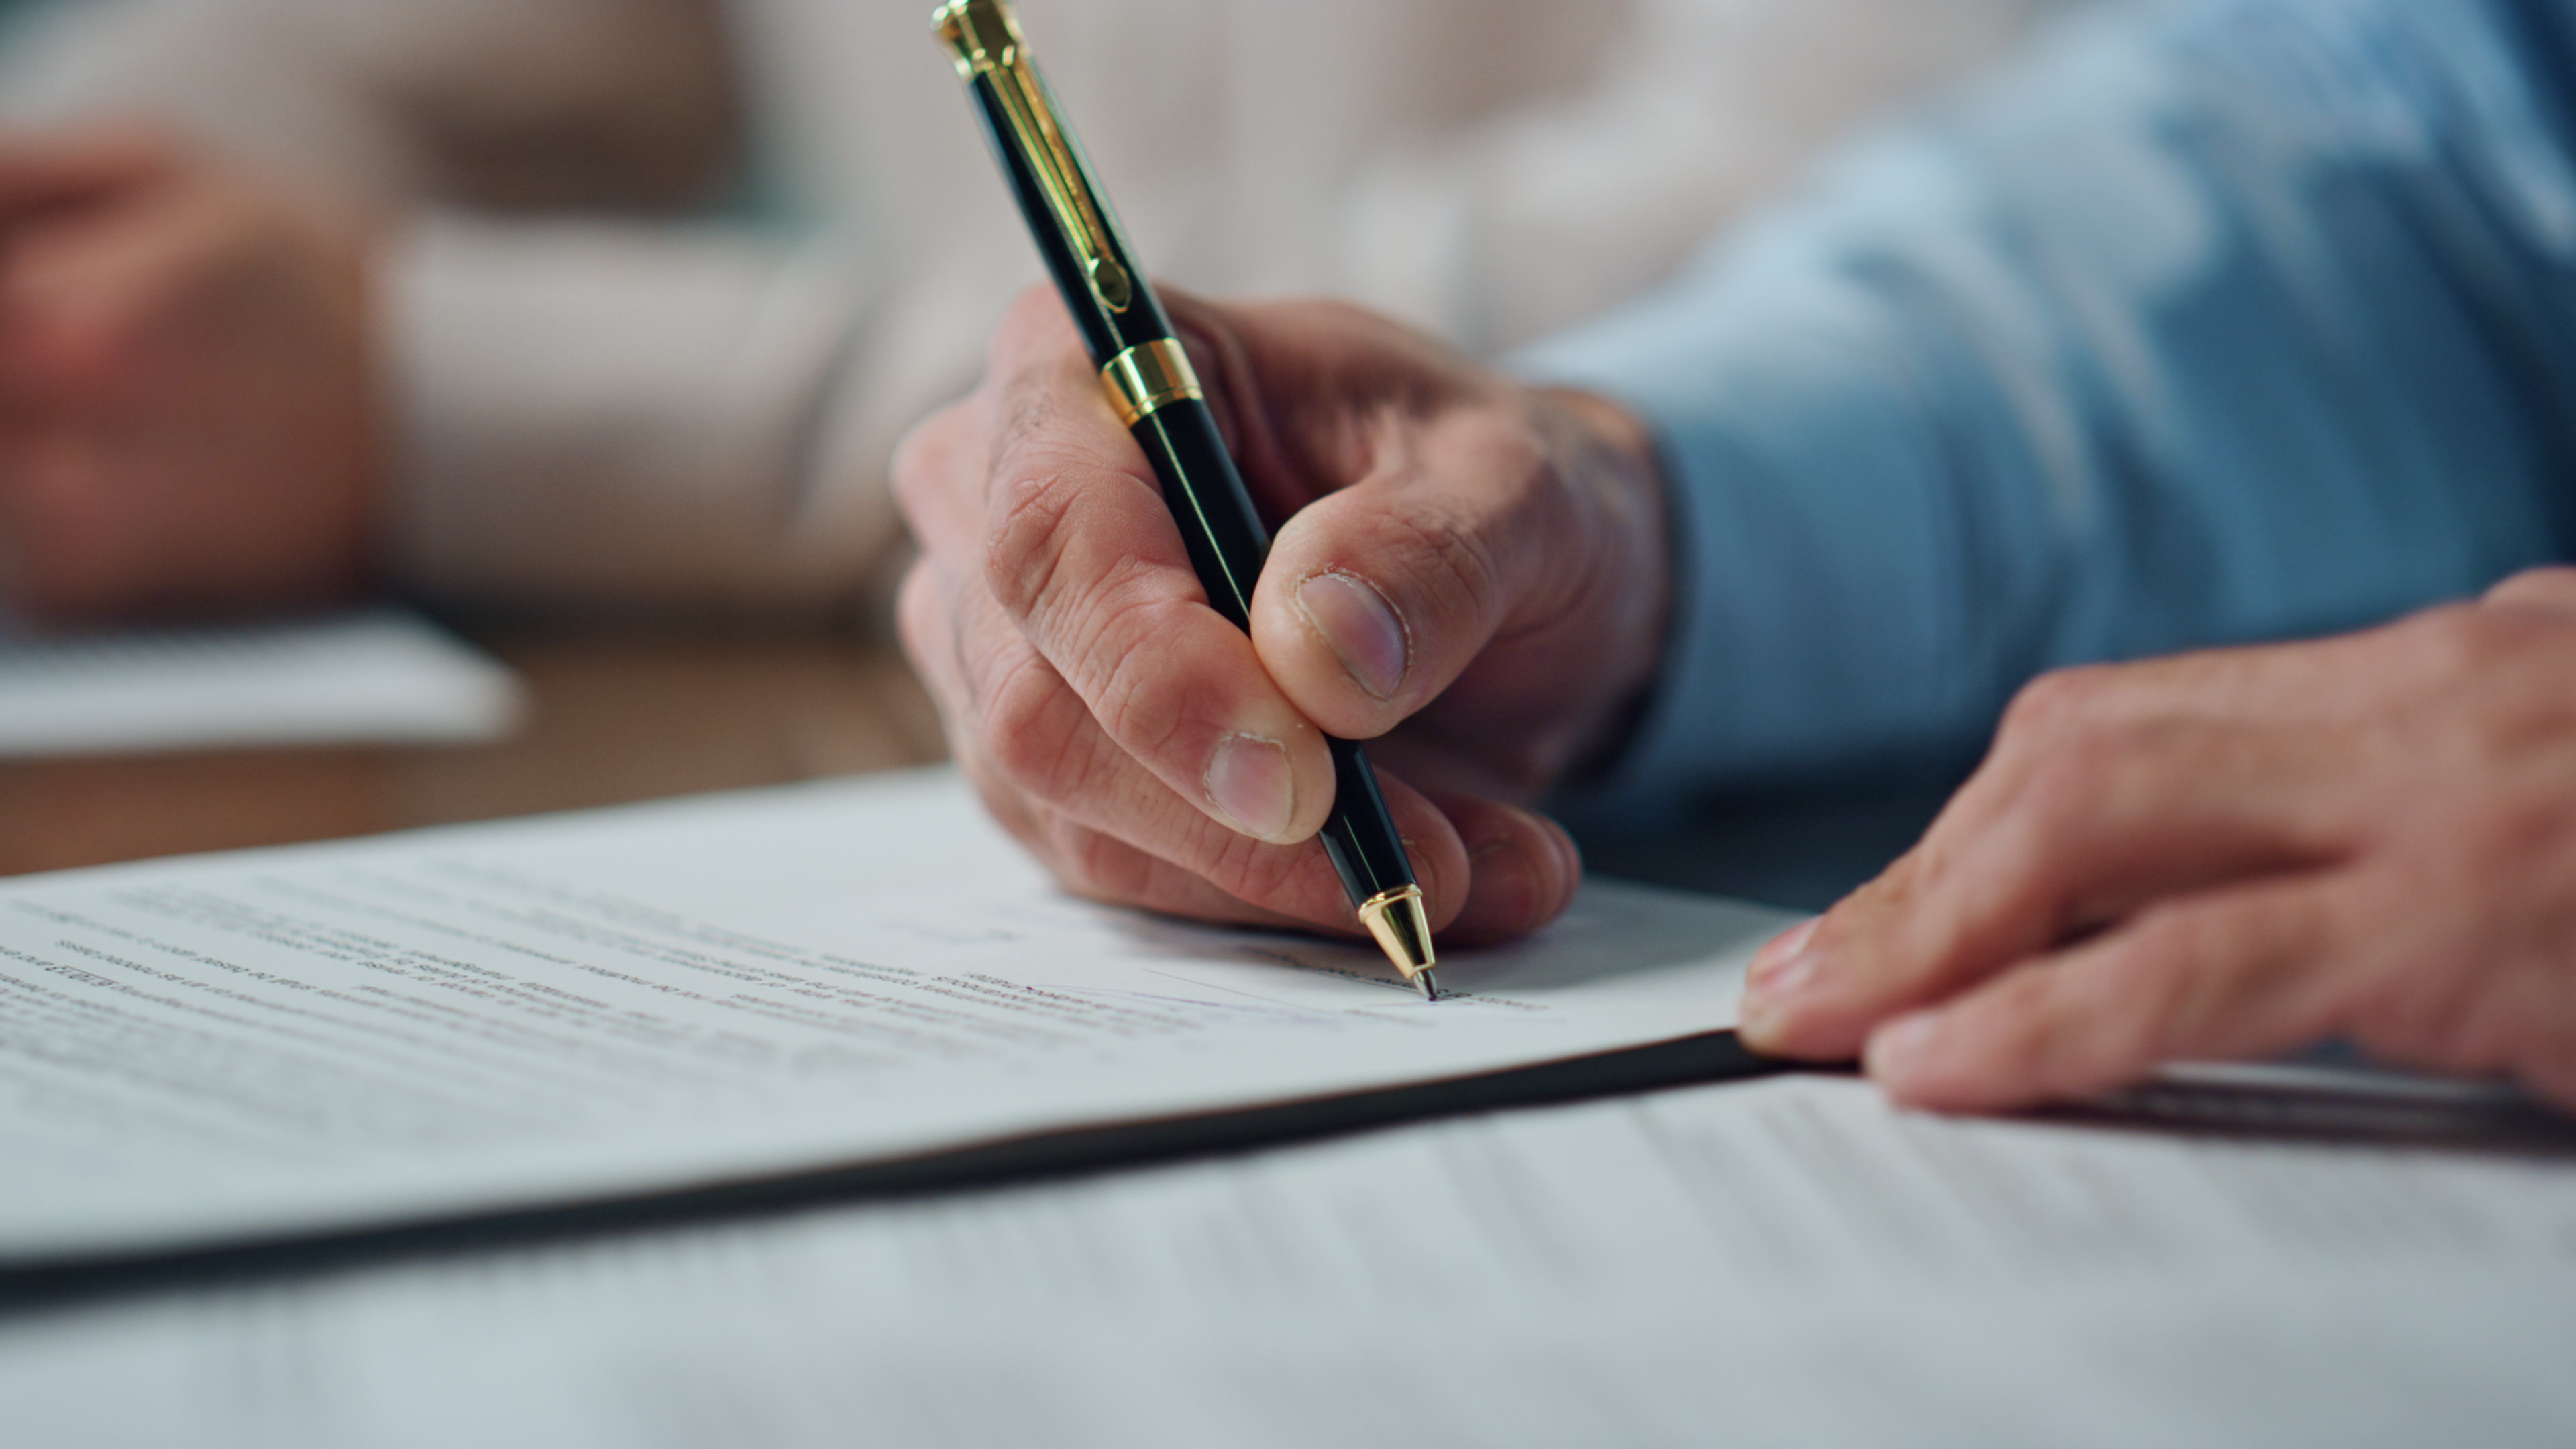 Person signing a document with a pen, close-up on hands and paper